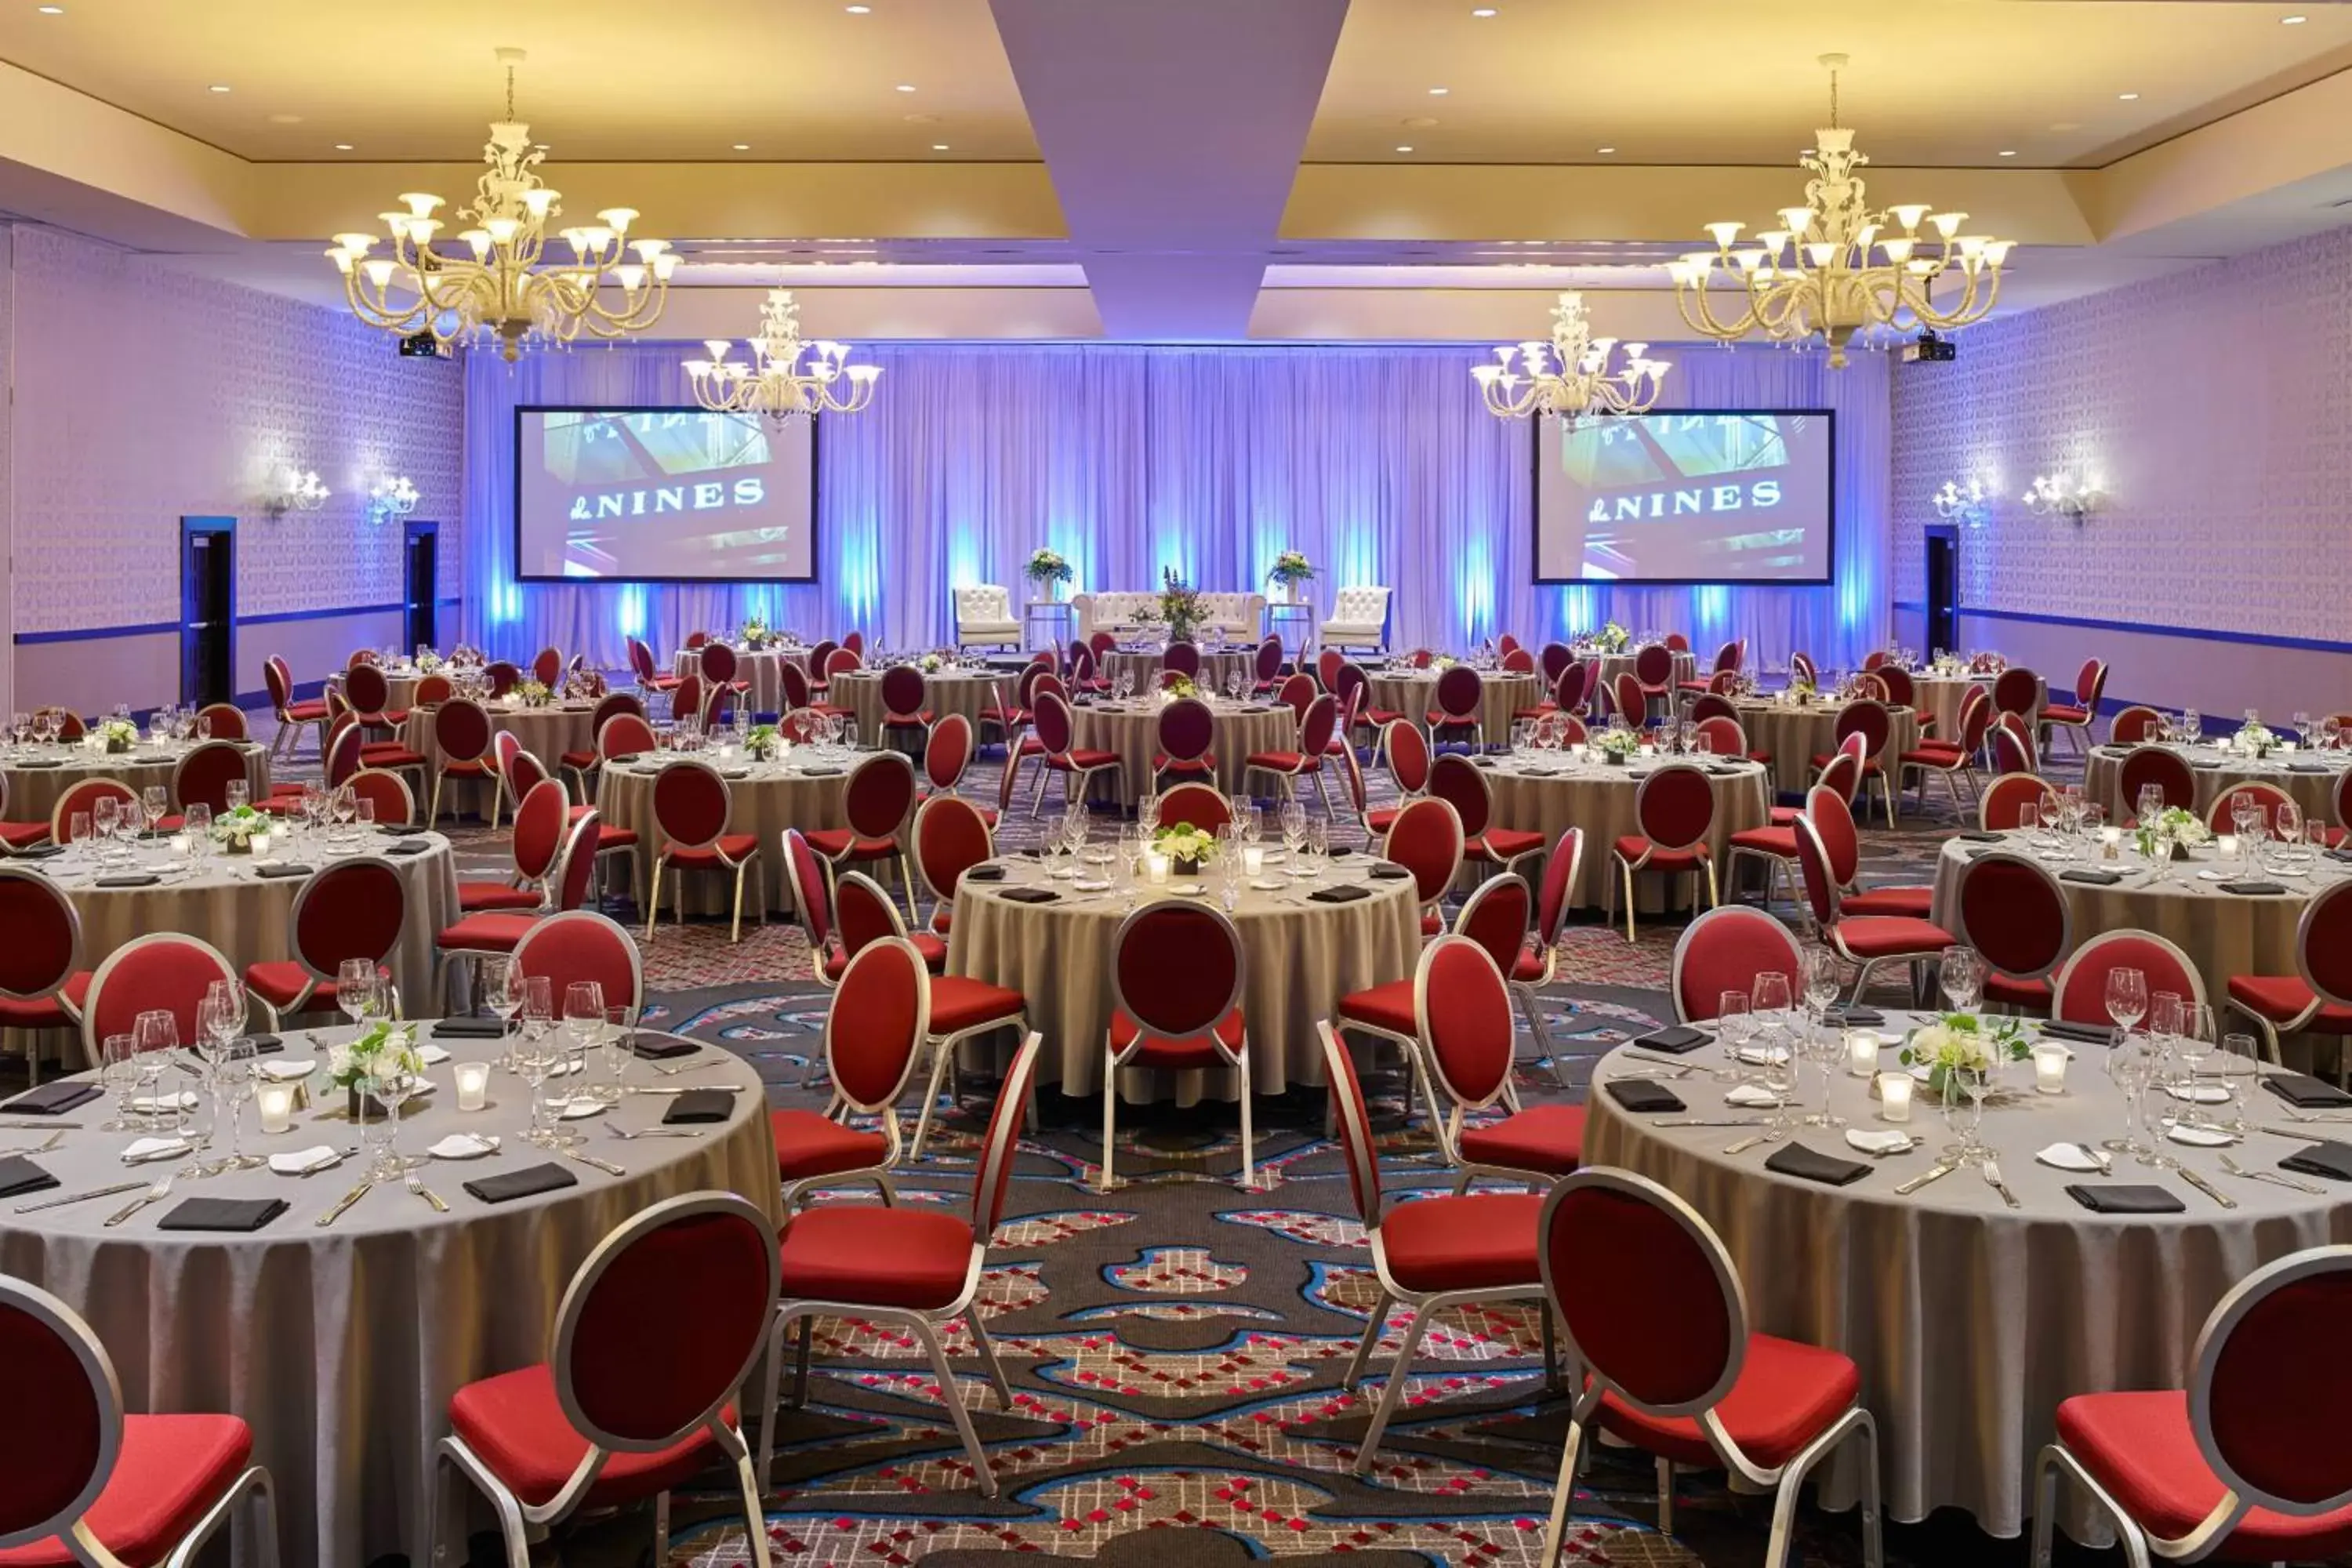 Meeting/conference room, Banquet Facilities in The Nines, a Luxury Collection Hotel, Portland